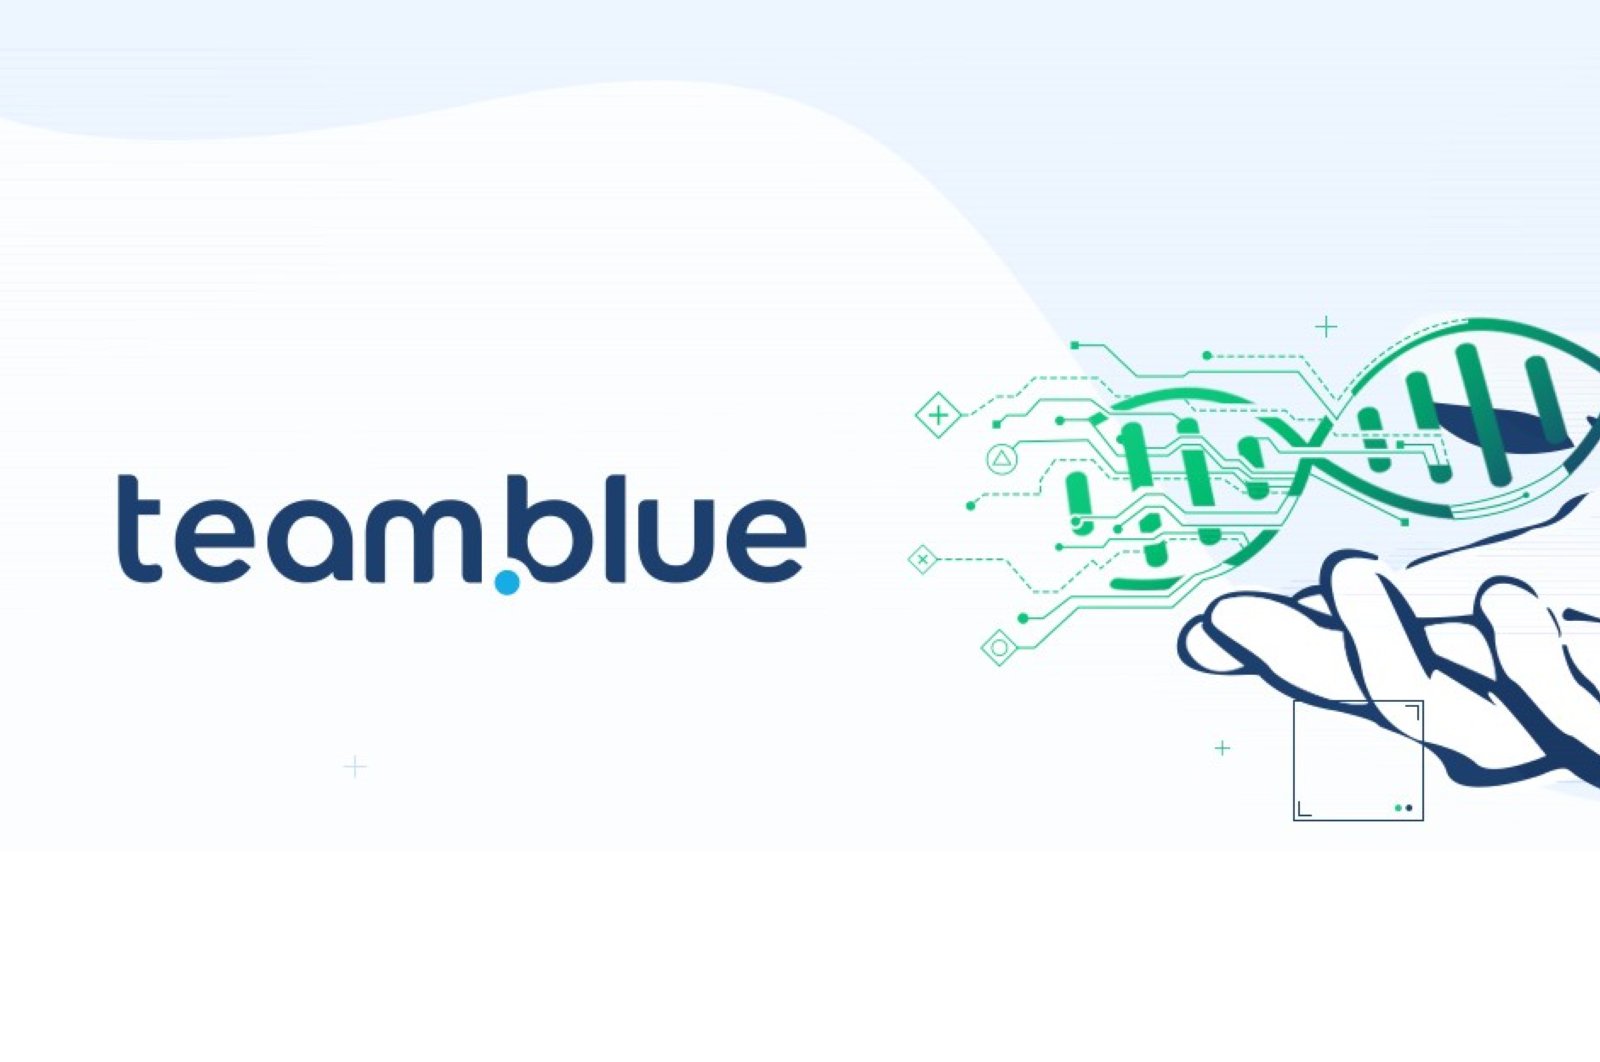 The logo of team.blue, which announced that it acquired Turkish network provider Natro on June 22, 2020. (Courtesy of team.blue)